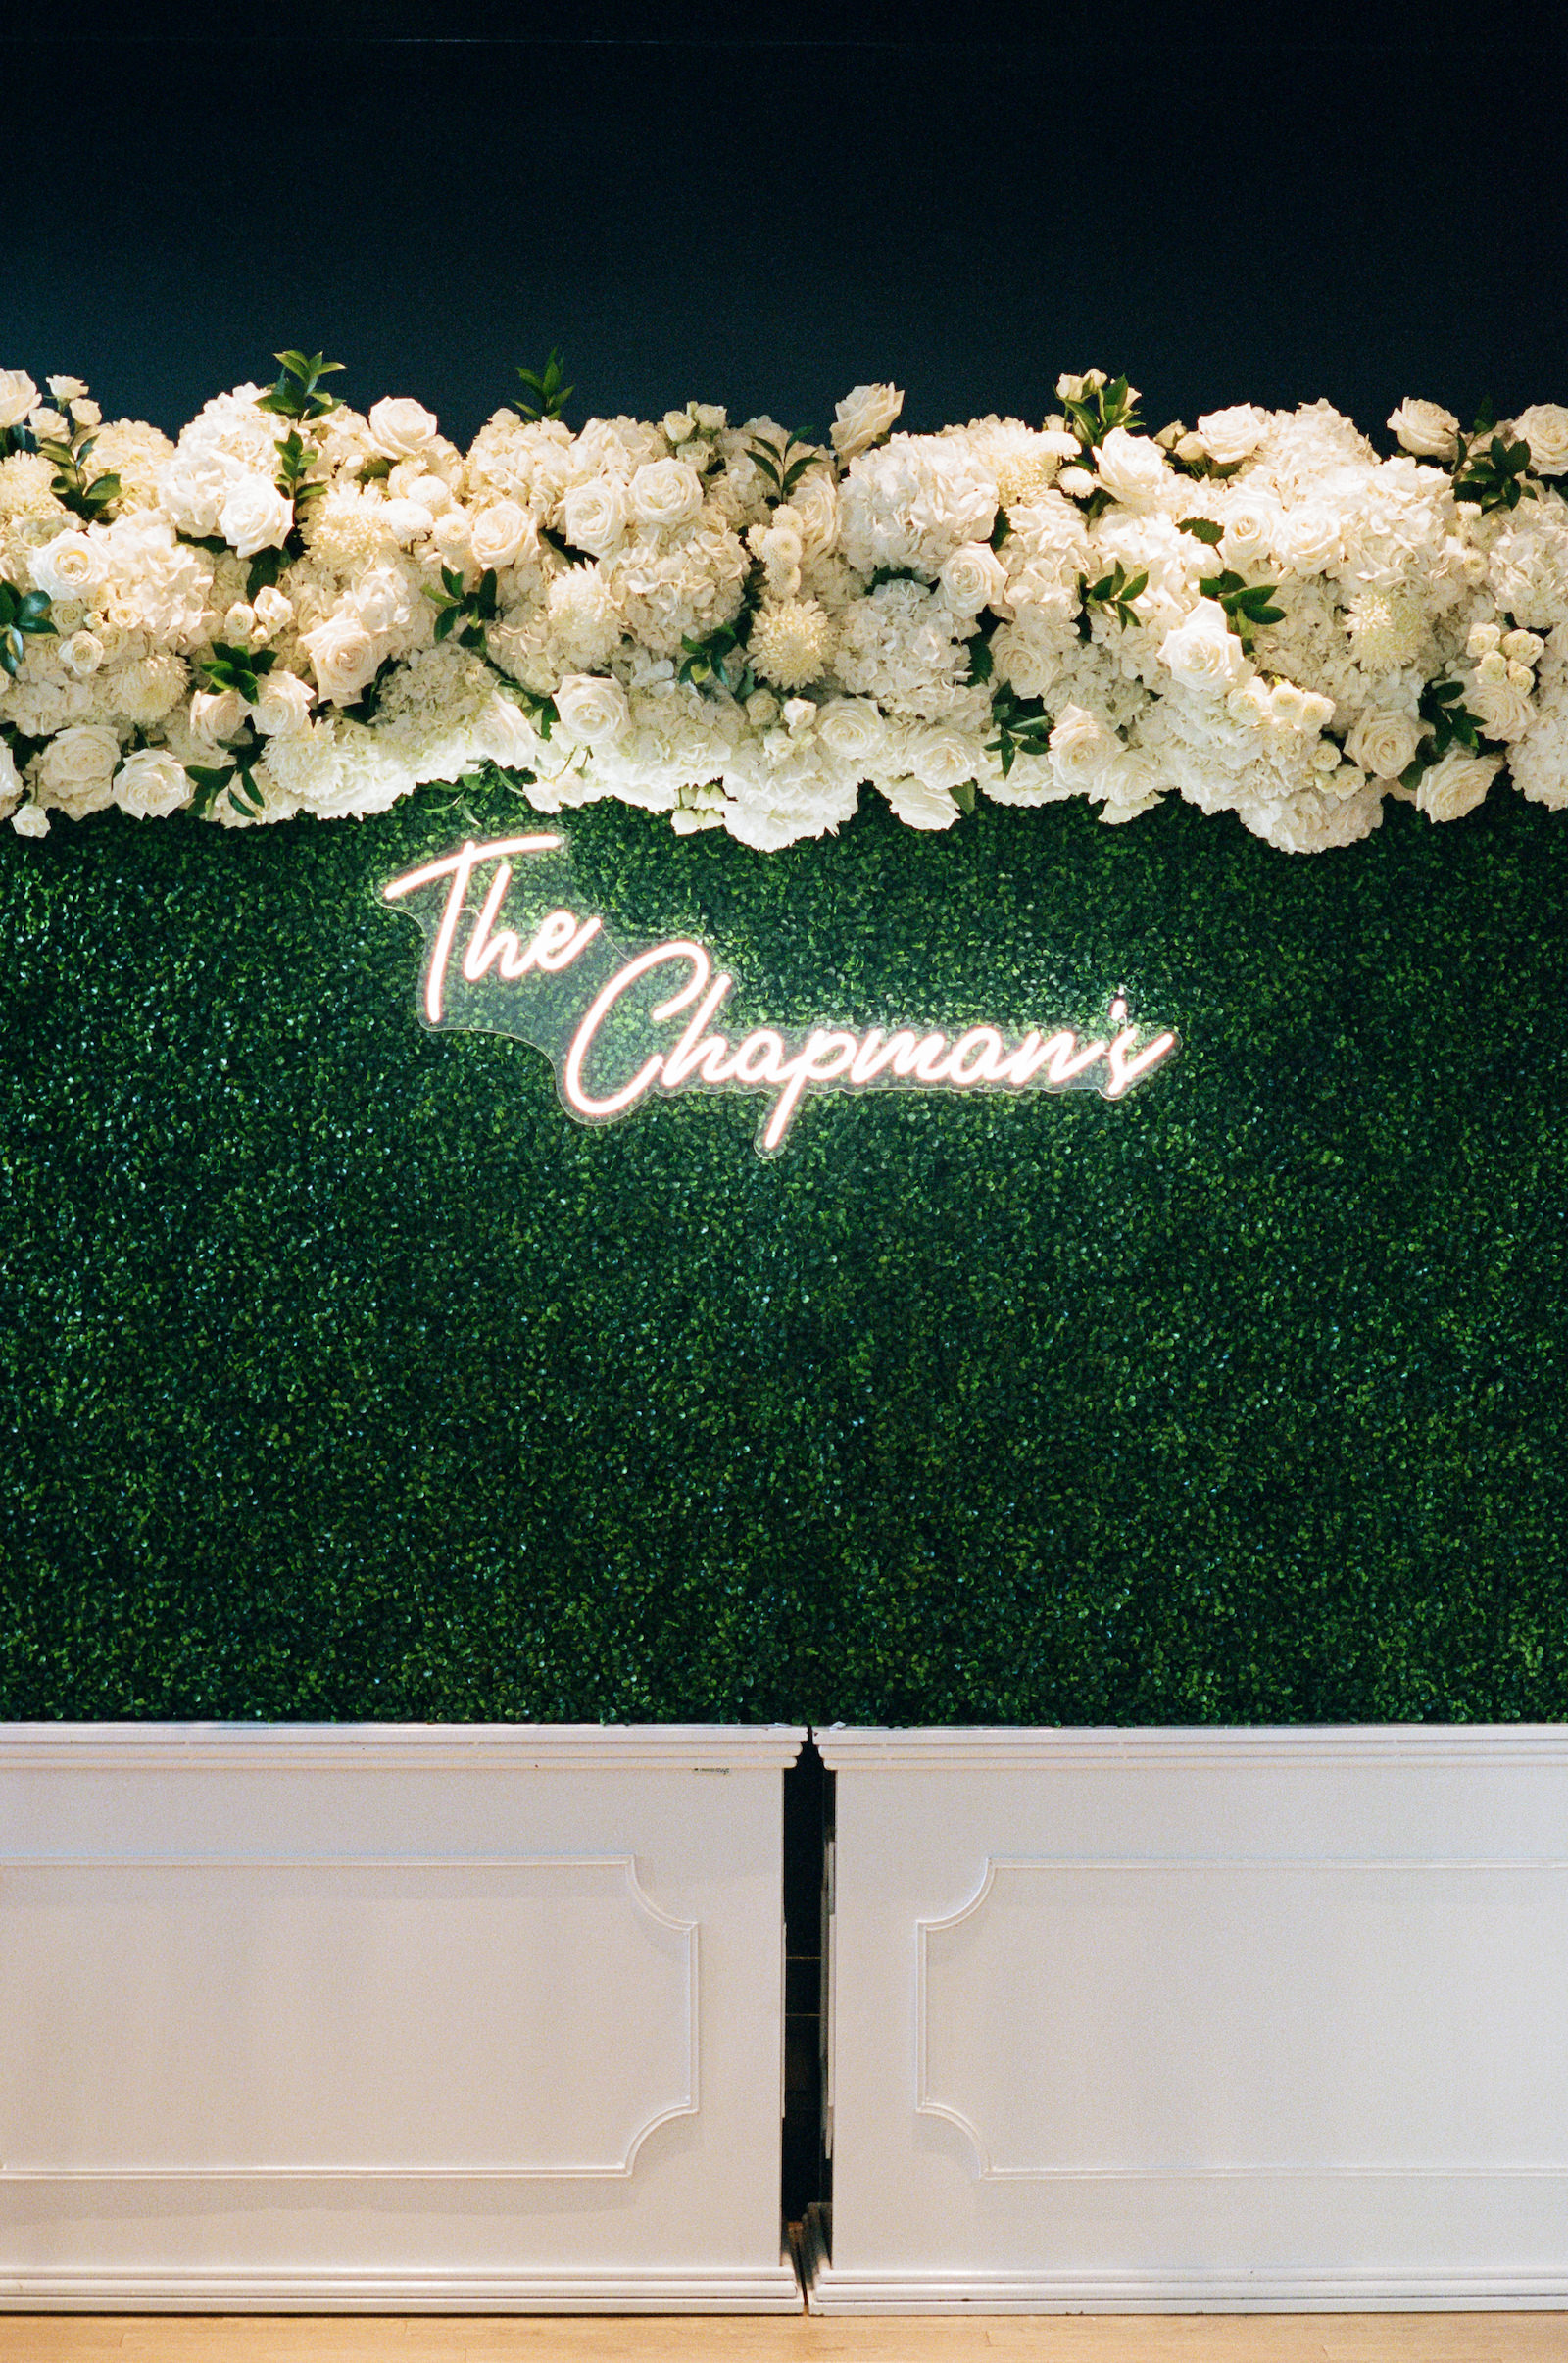 Luxurious Formal Wedding Reception Decor, Greenery Wall with Custom Neon Sign, All White Lush Flowers Hanging | Tampa Bay Wedding Florist Bruce Wayne Florals | Wedding Planner Parties A'la Carte | Wedding Rentals Gabro Event Services